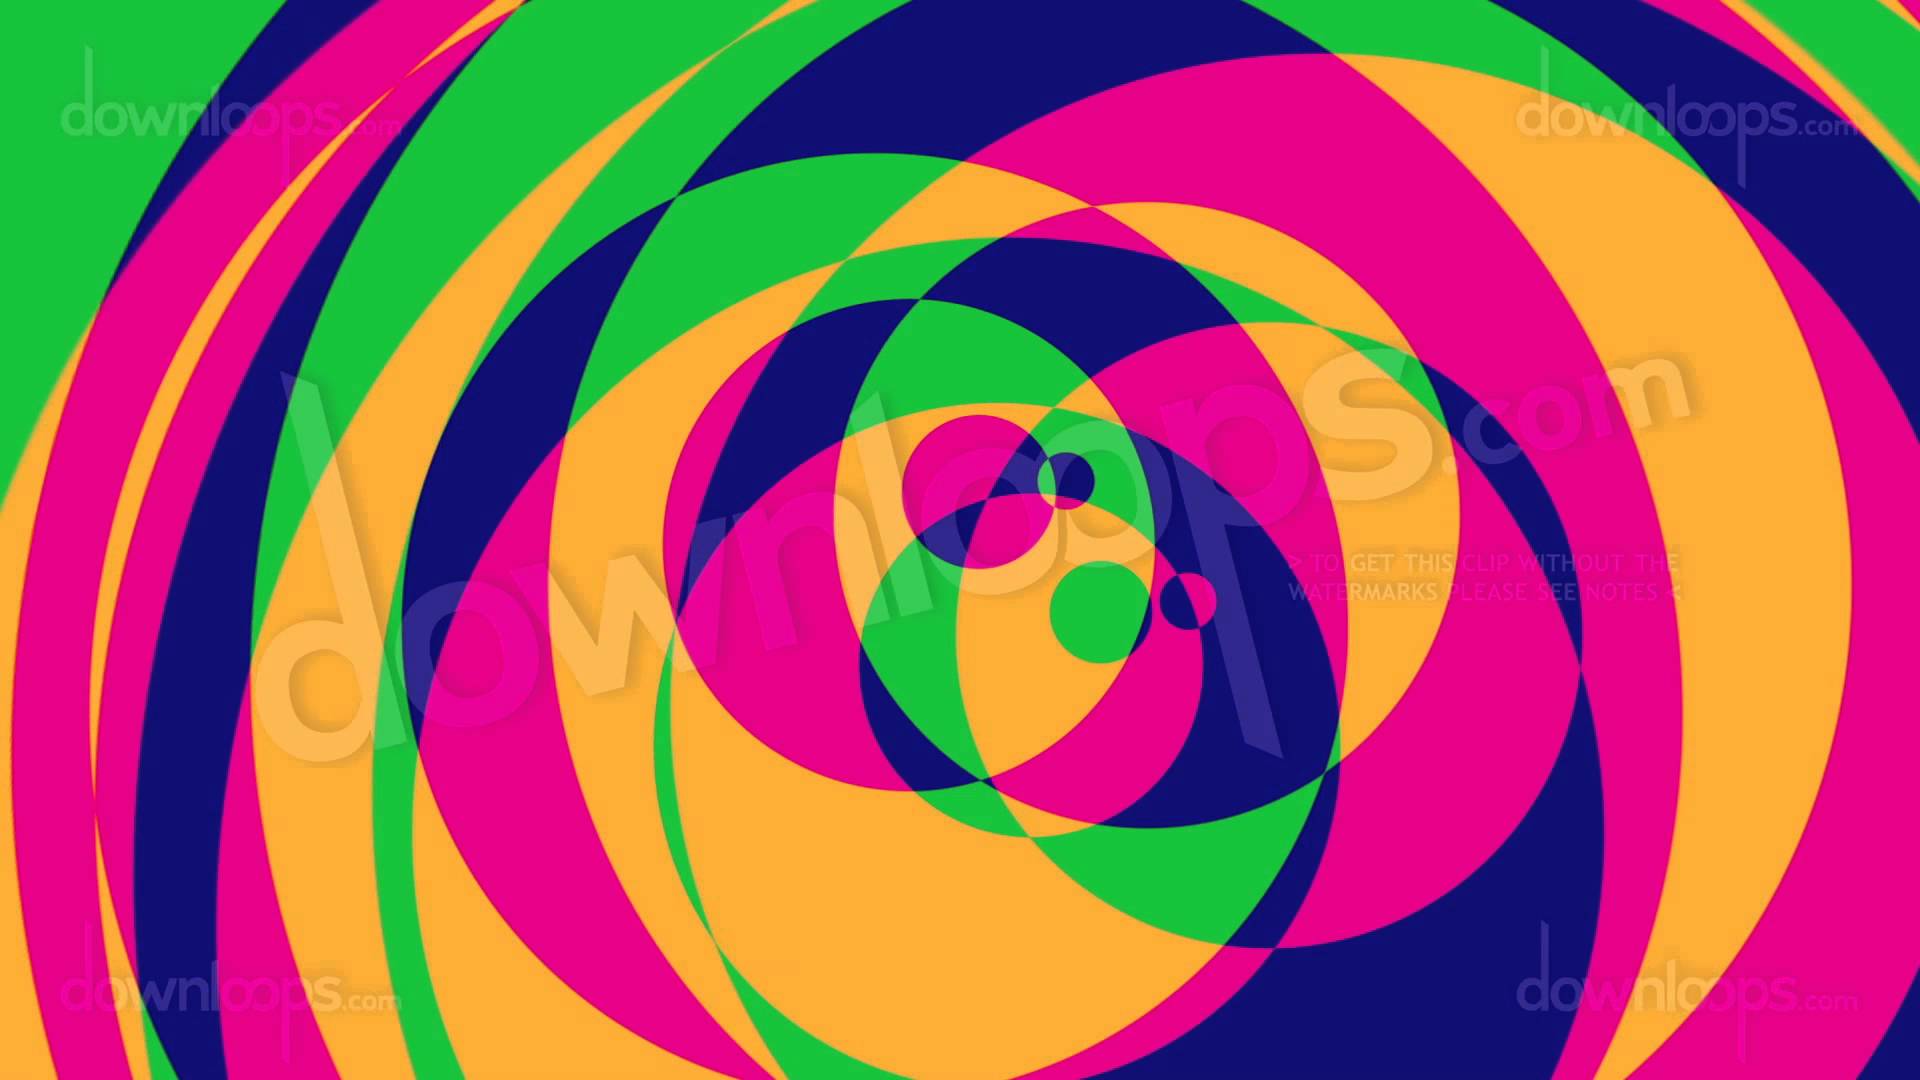 Psychedelic Circles 2 - Colorful Graphical Video Loop / Animated ...